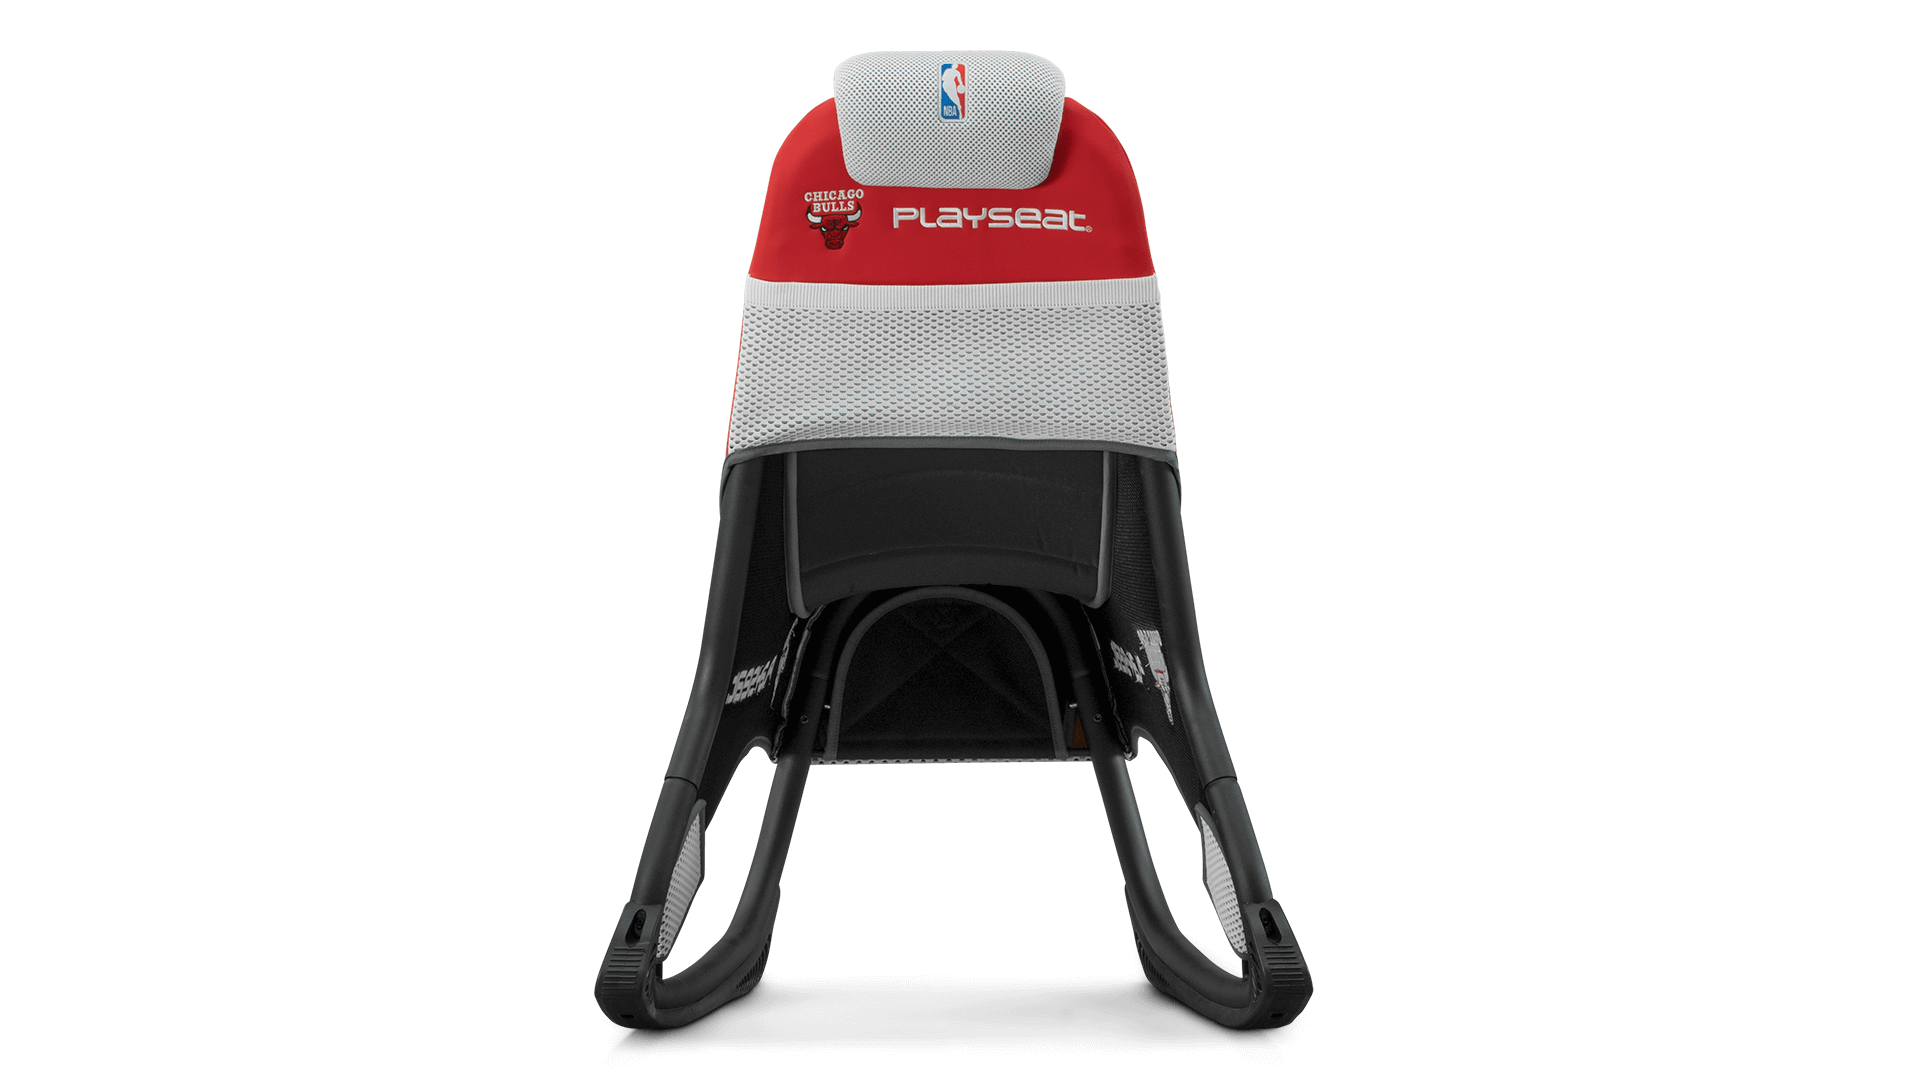 playseat-go-nba-chicago-bulls-gaming-seat-back-view-1920x1080.png